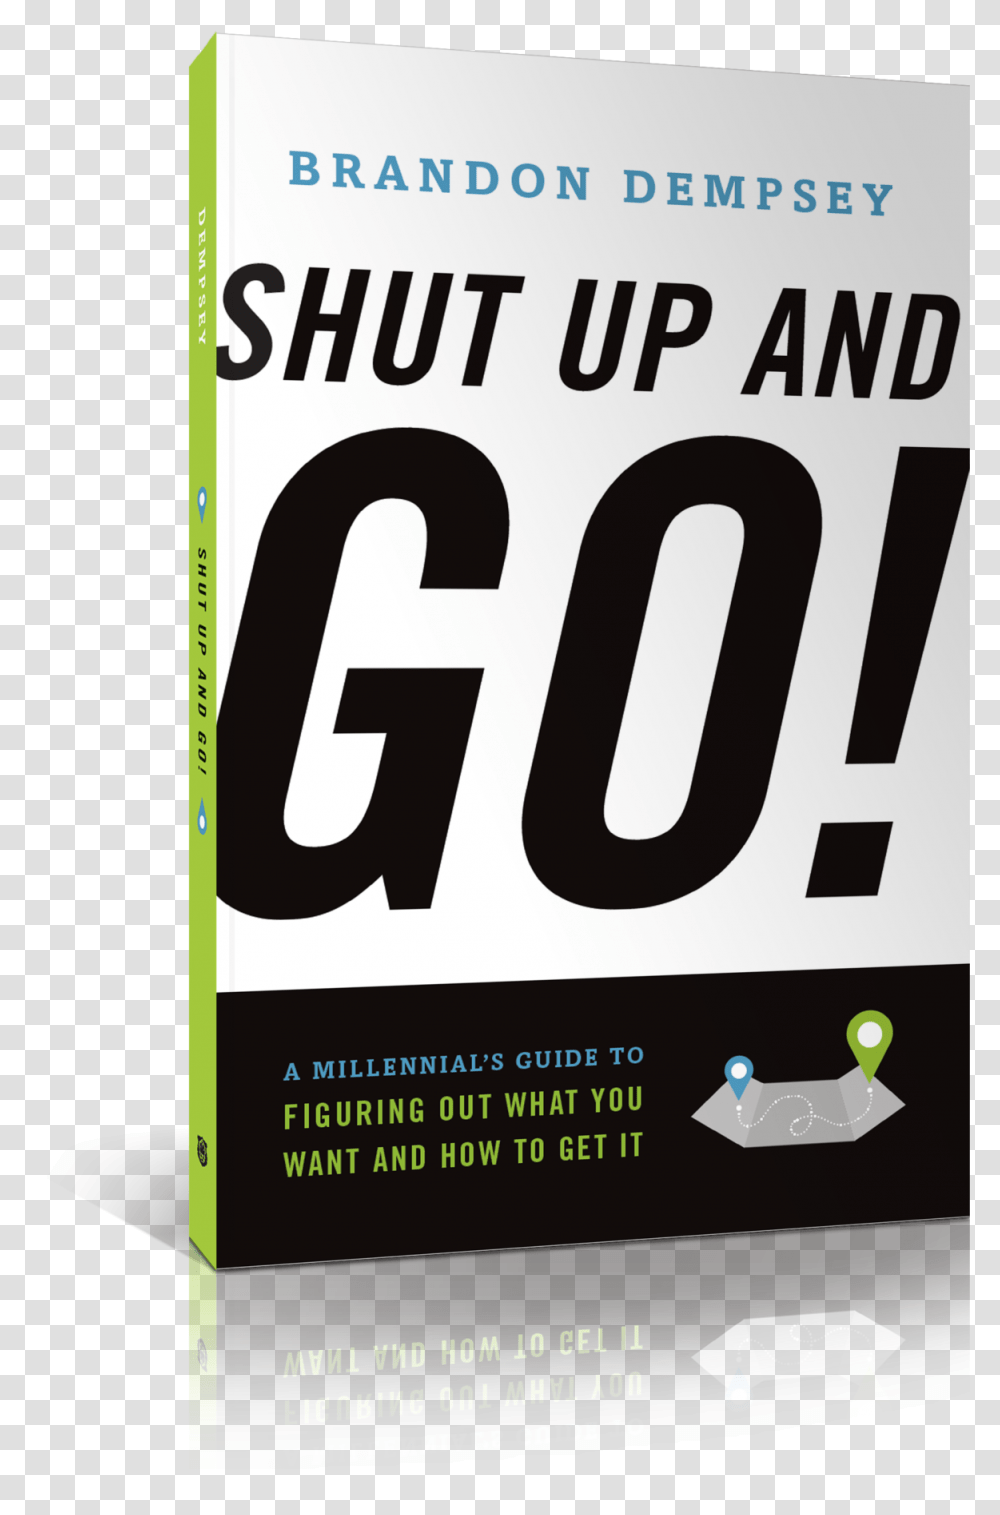 Shut Up And Go Image Book Cover, Vehicle, Transportation, License Plate Transparent Png